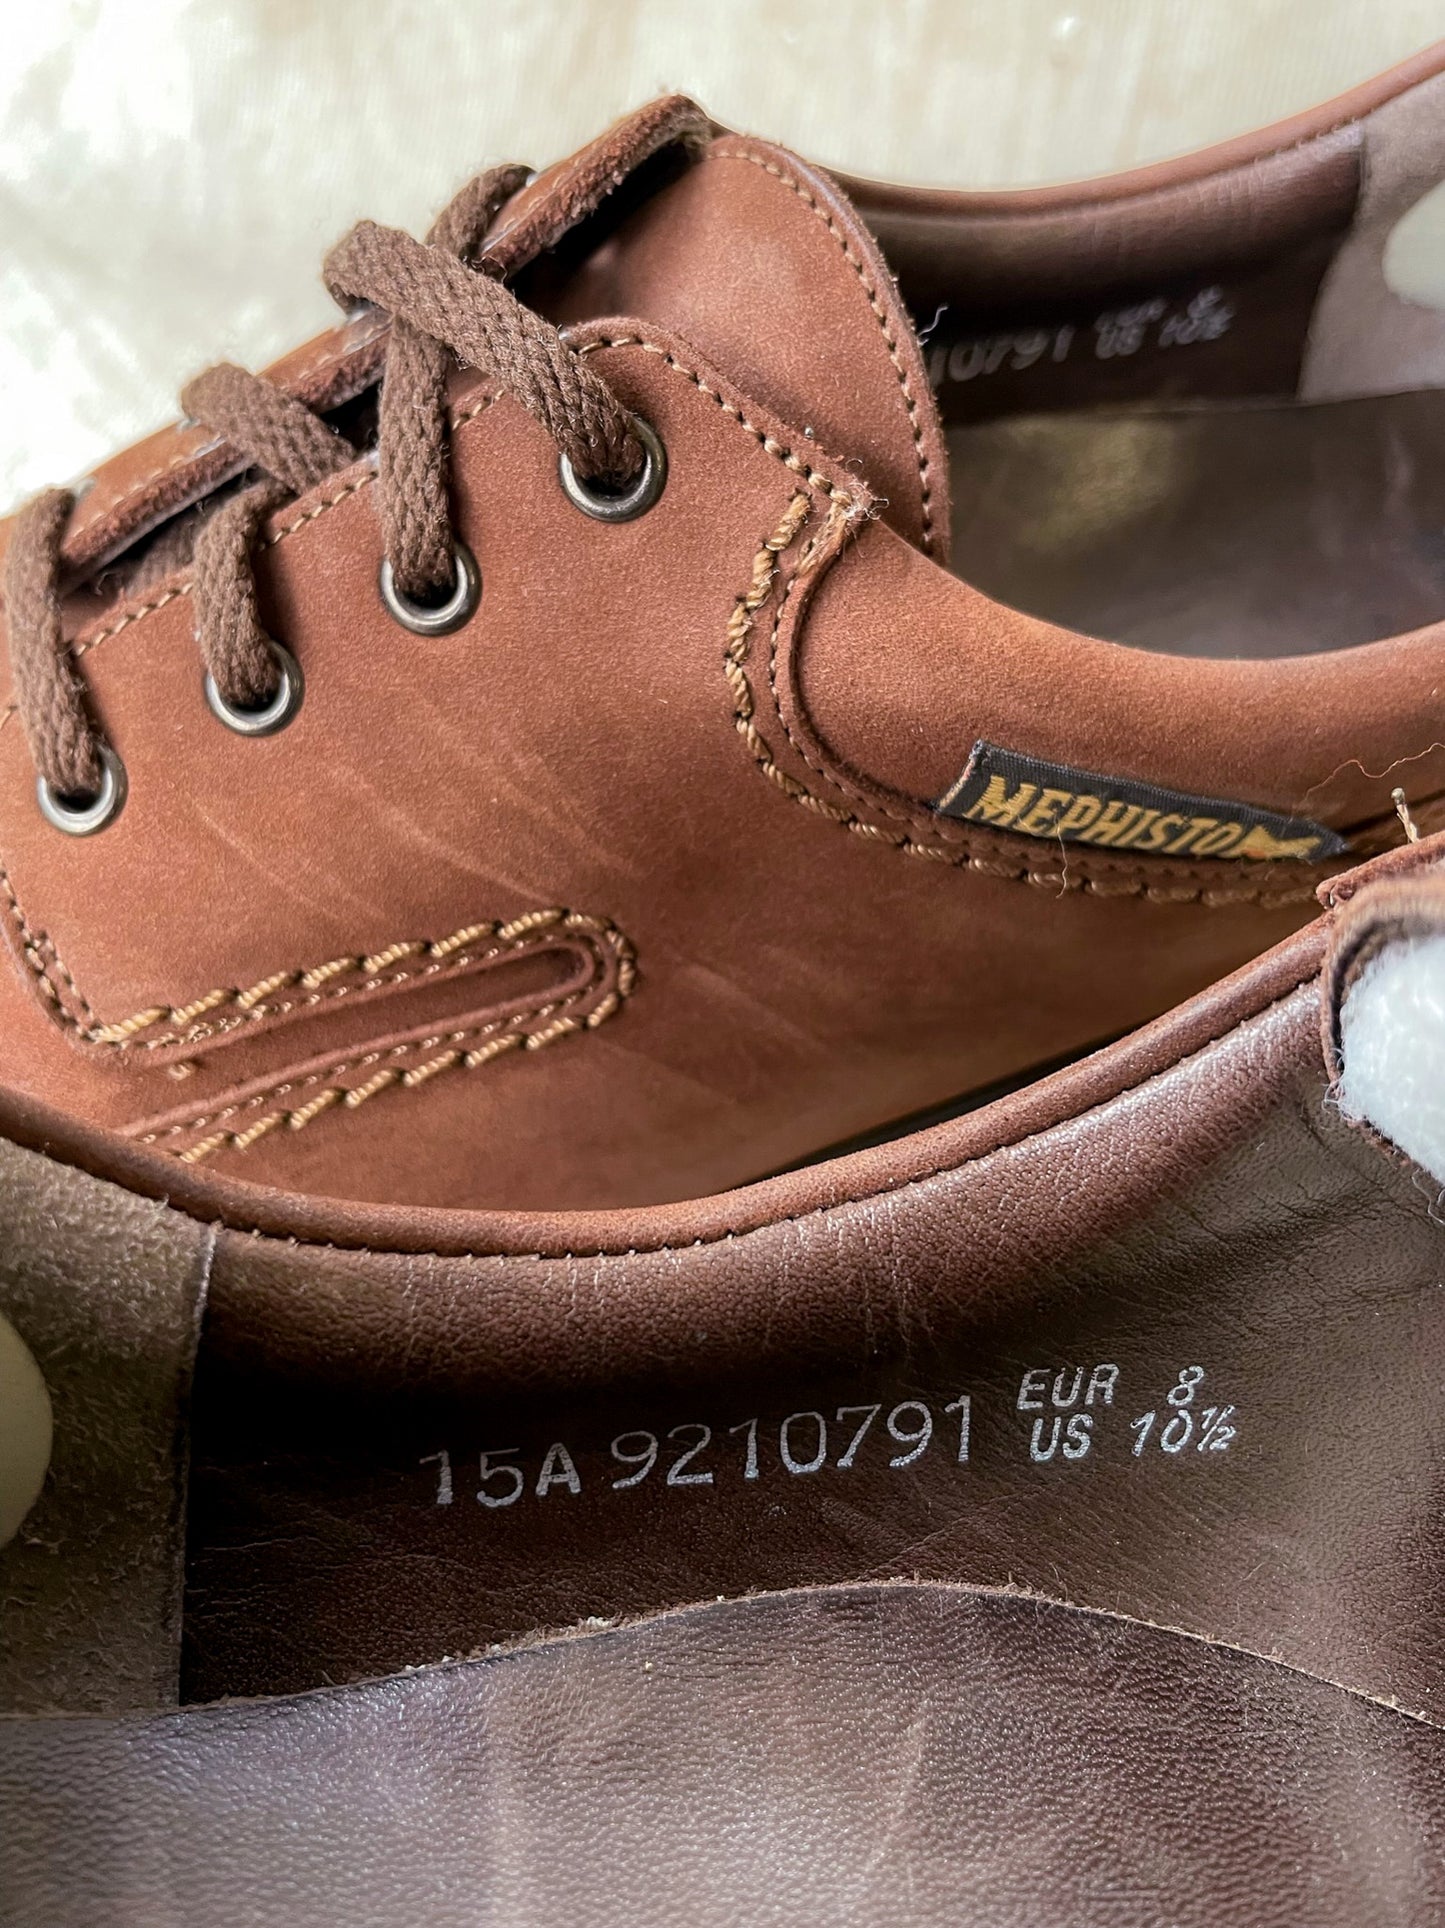 Mephisto Shoes—[10.5W / 9M]